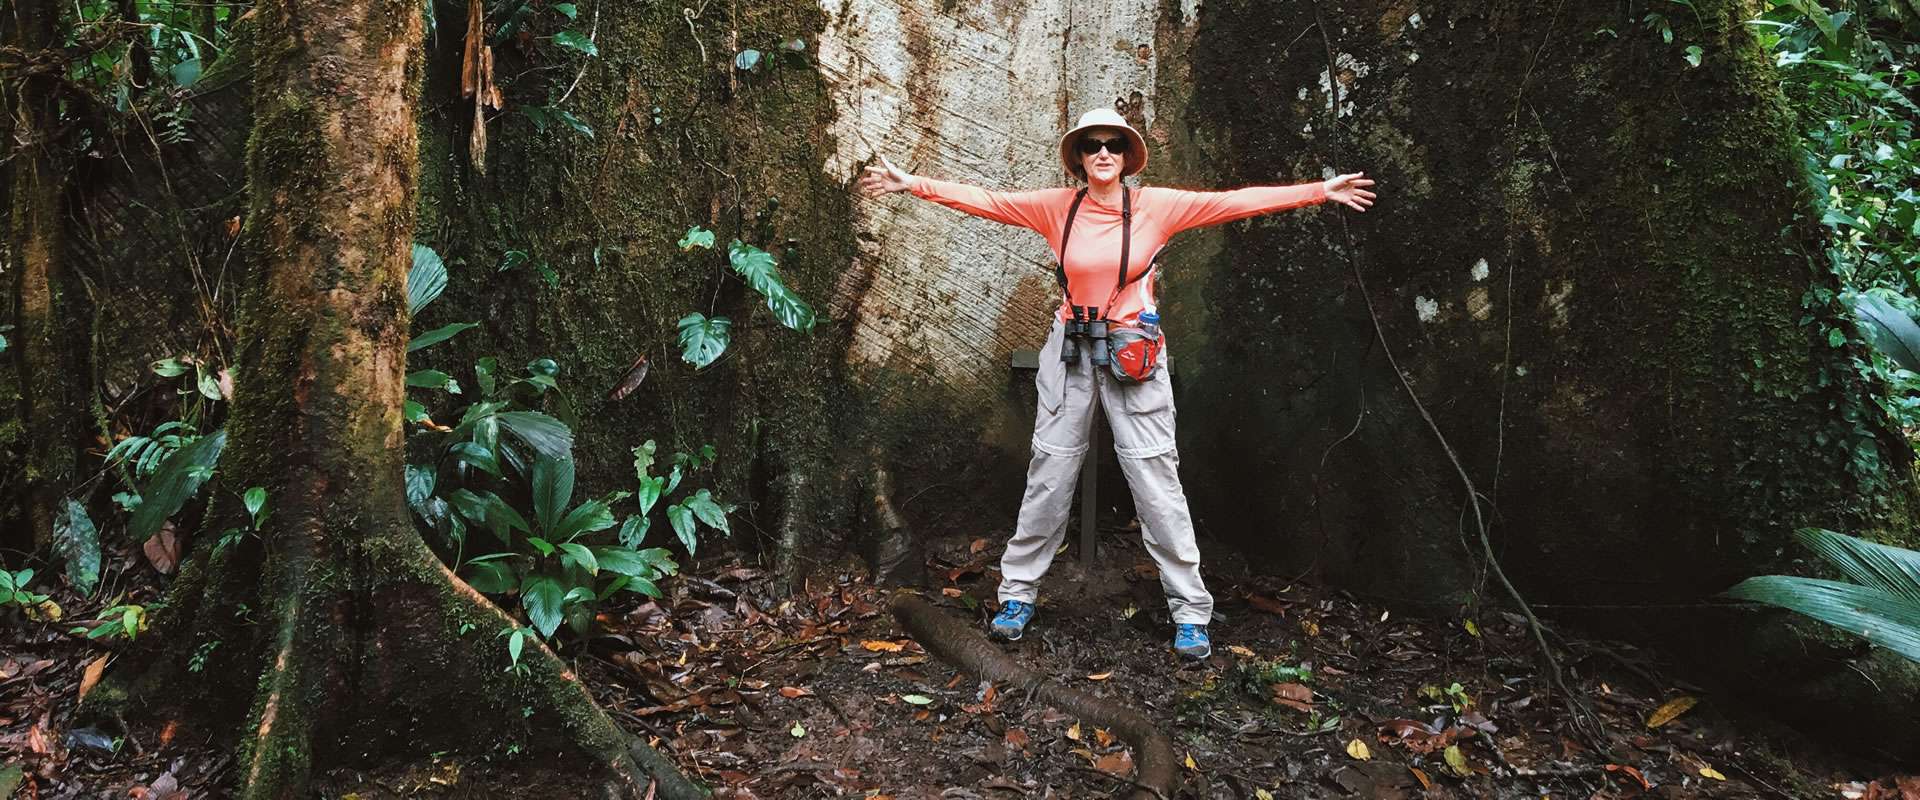 The authentic rainforest experience | Costa Rica Jade Tours